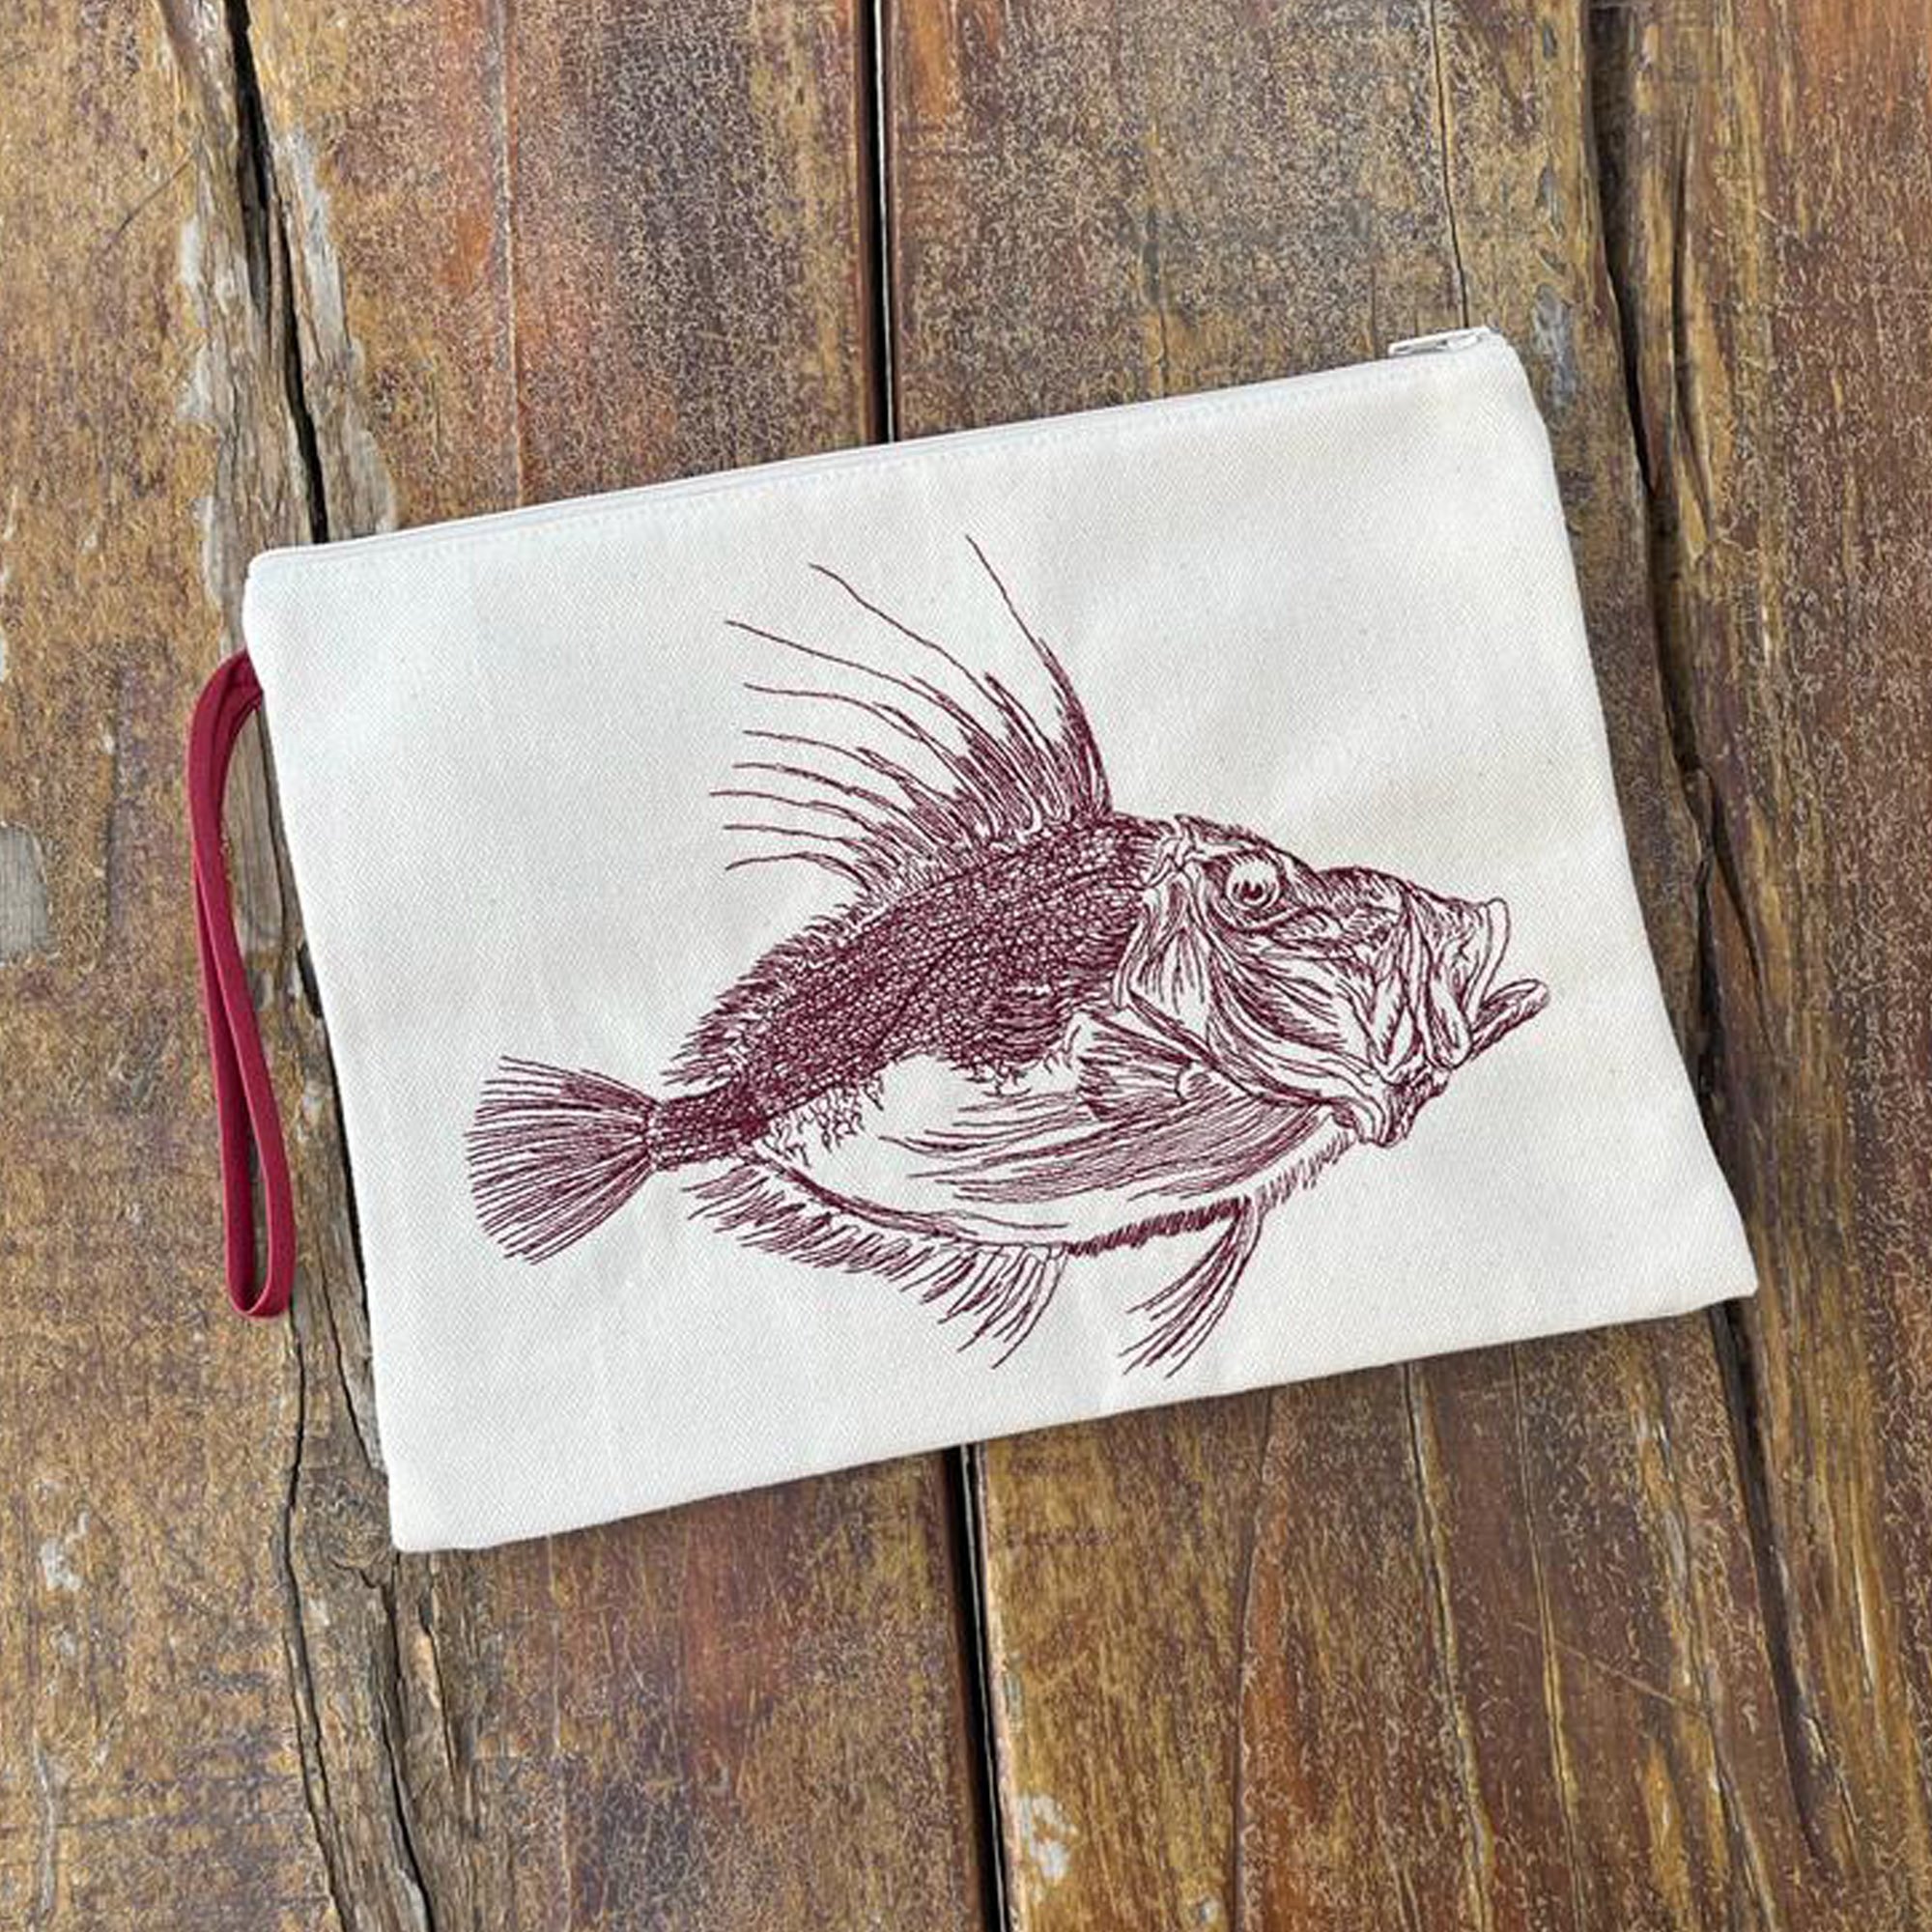 Fish Embroidery Clutch Bag